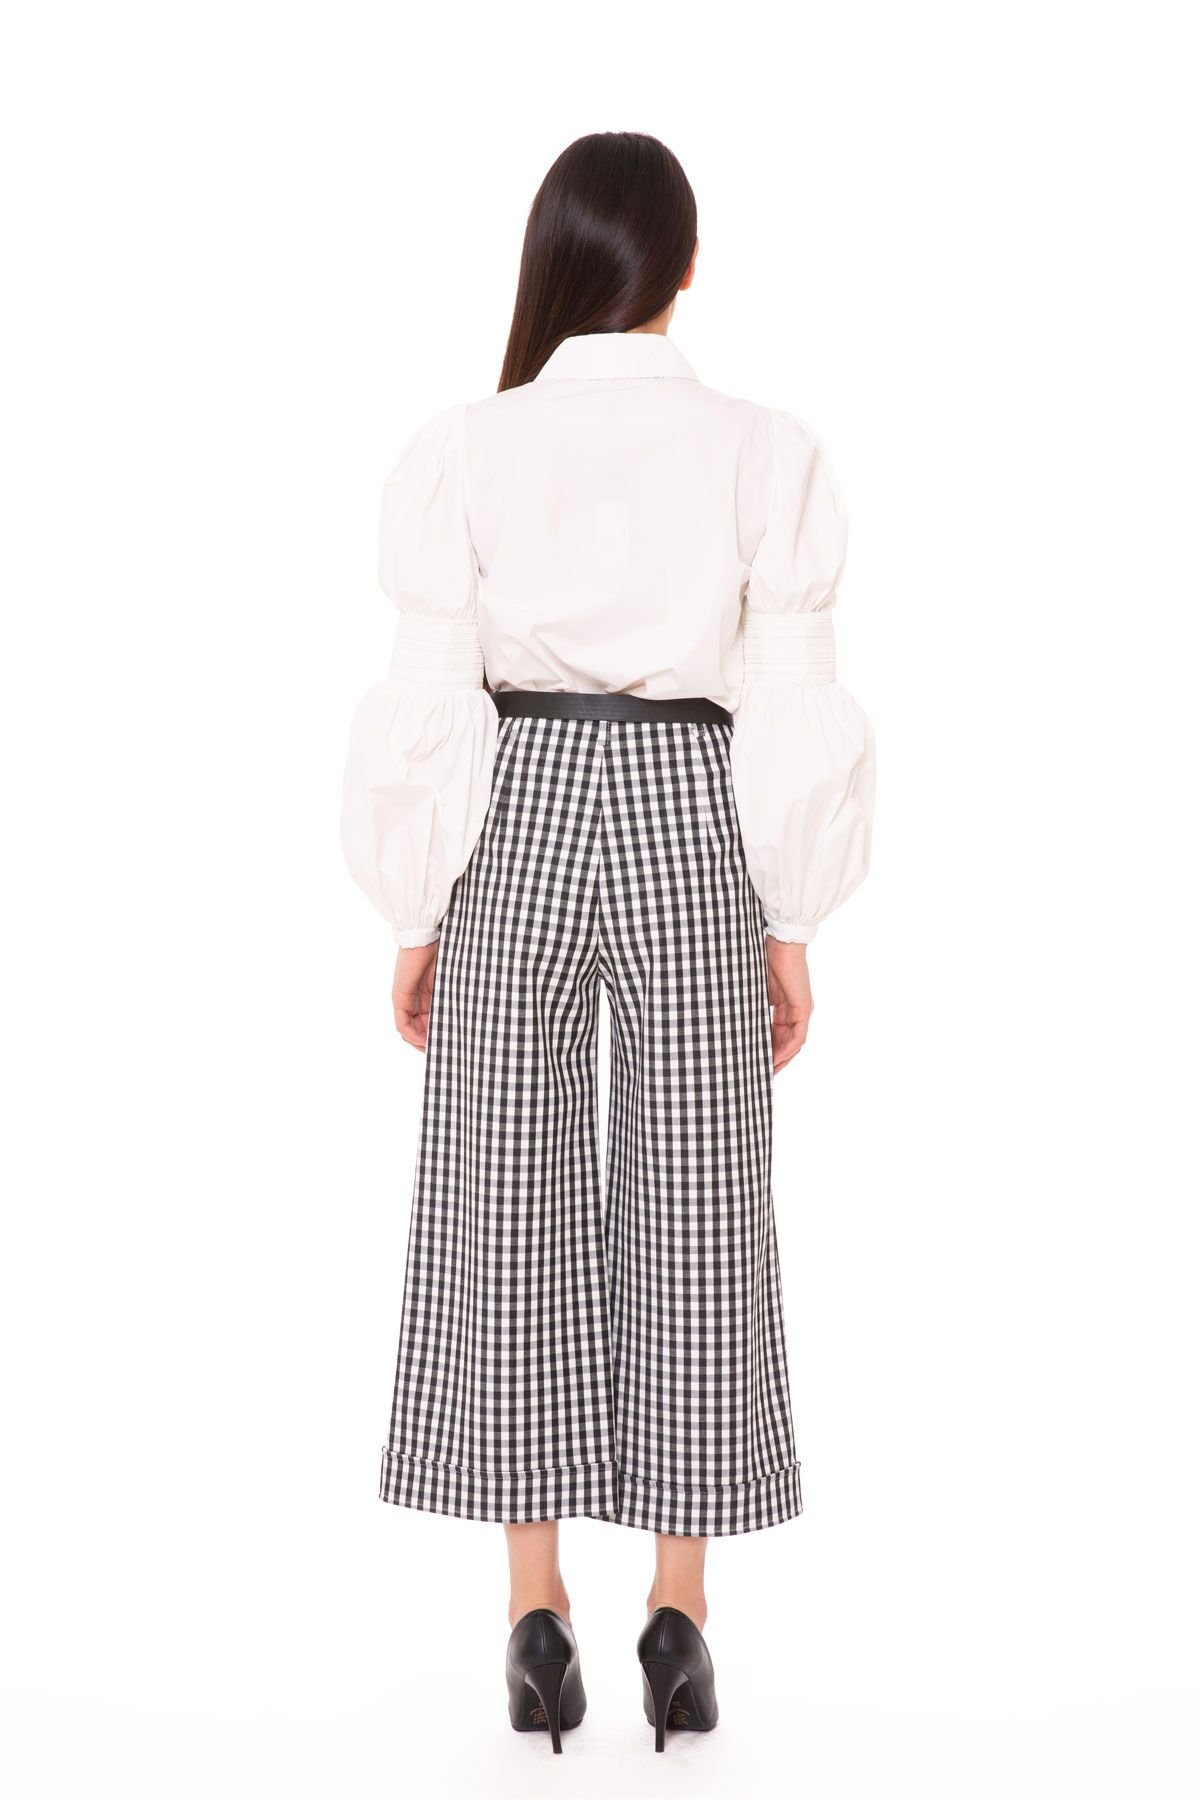 Gingham Leather Belt White Trousers